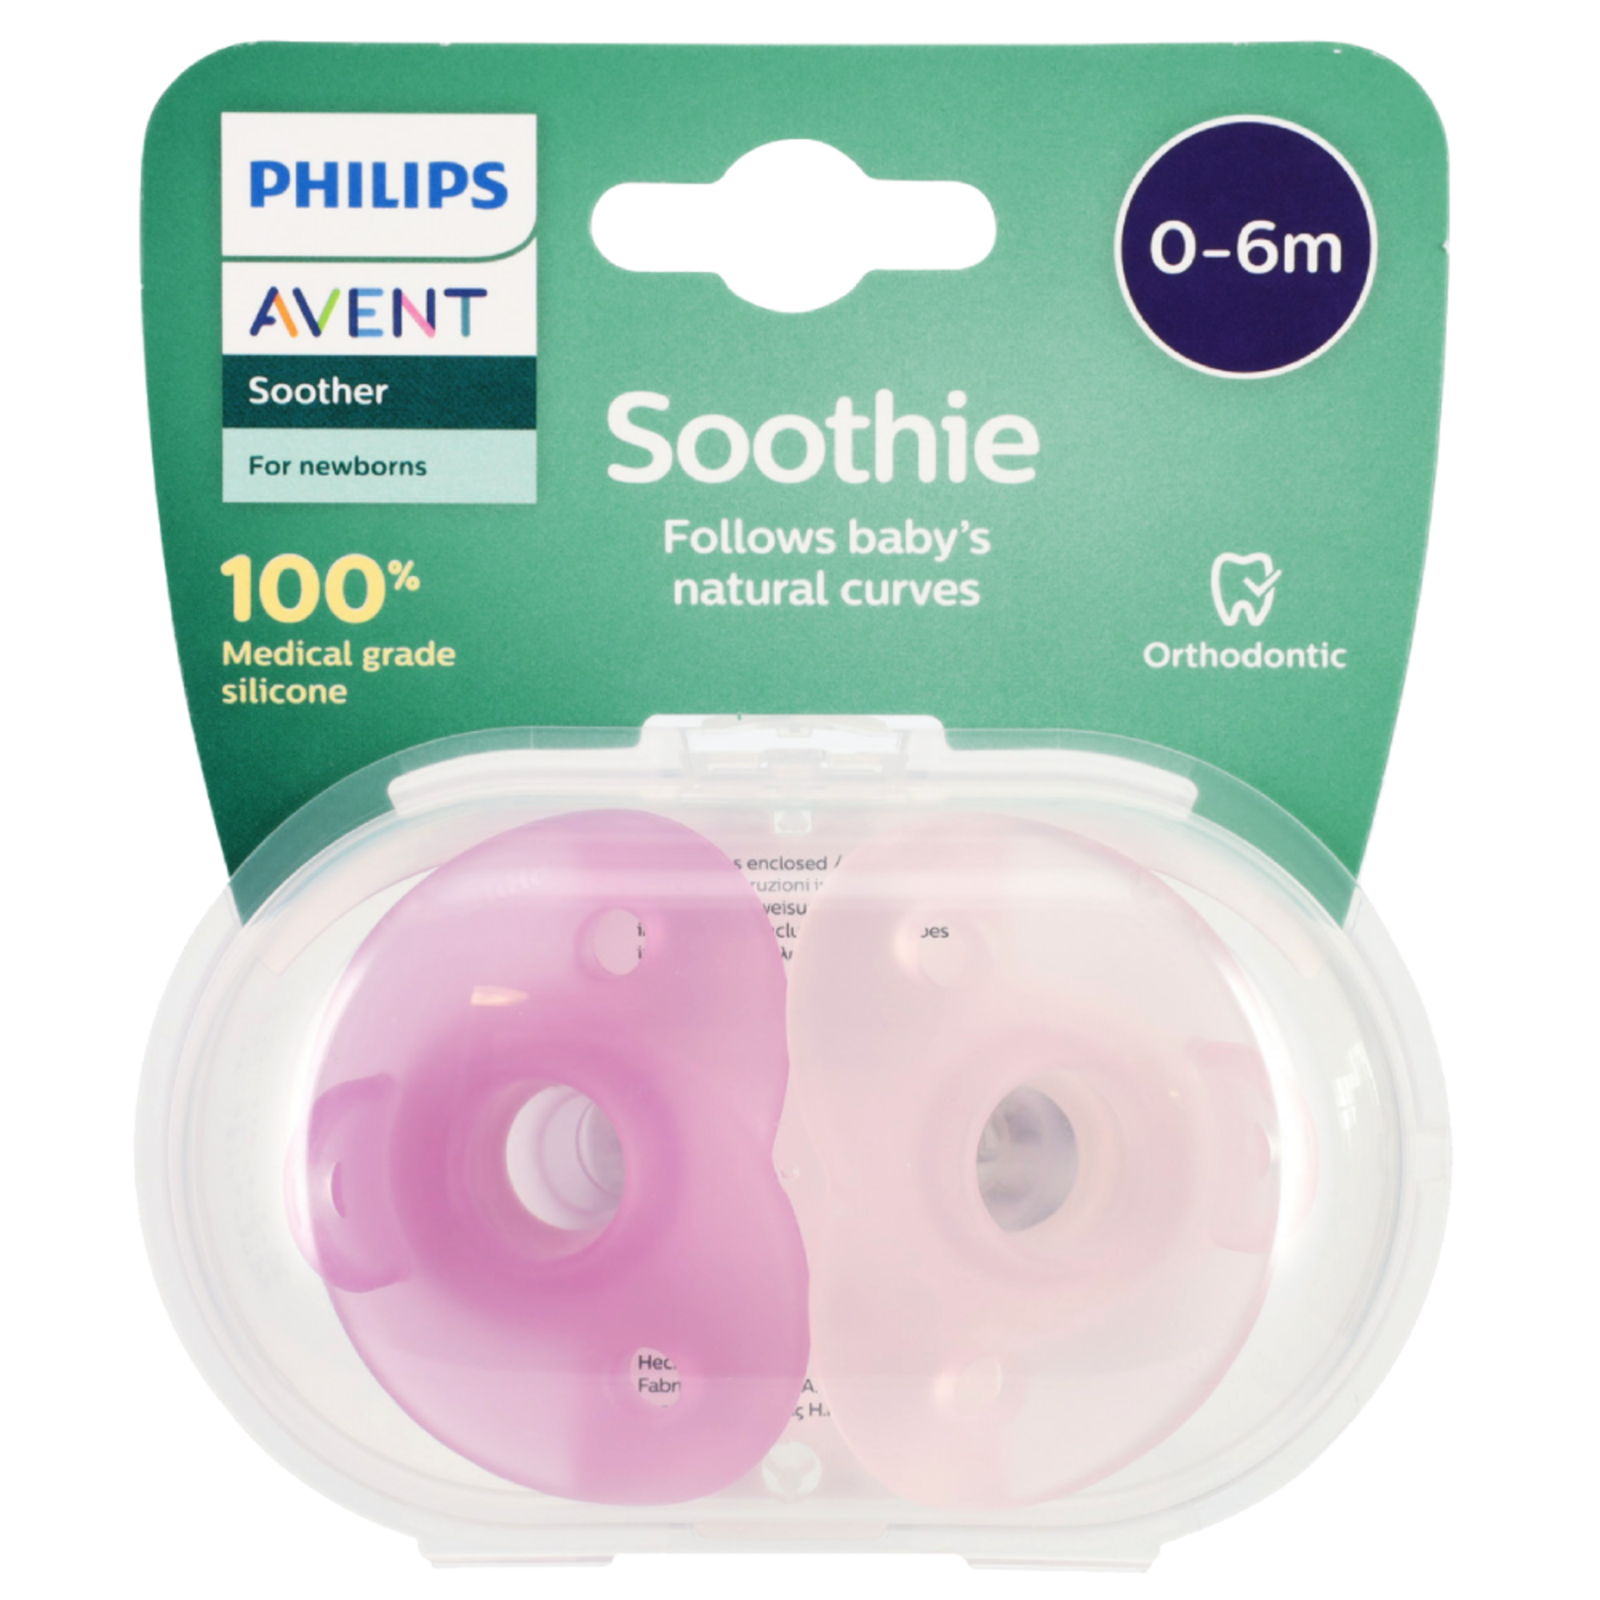 AVENT Soothie 0-6m 2 Pack – Pink - $84.90